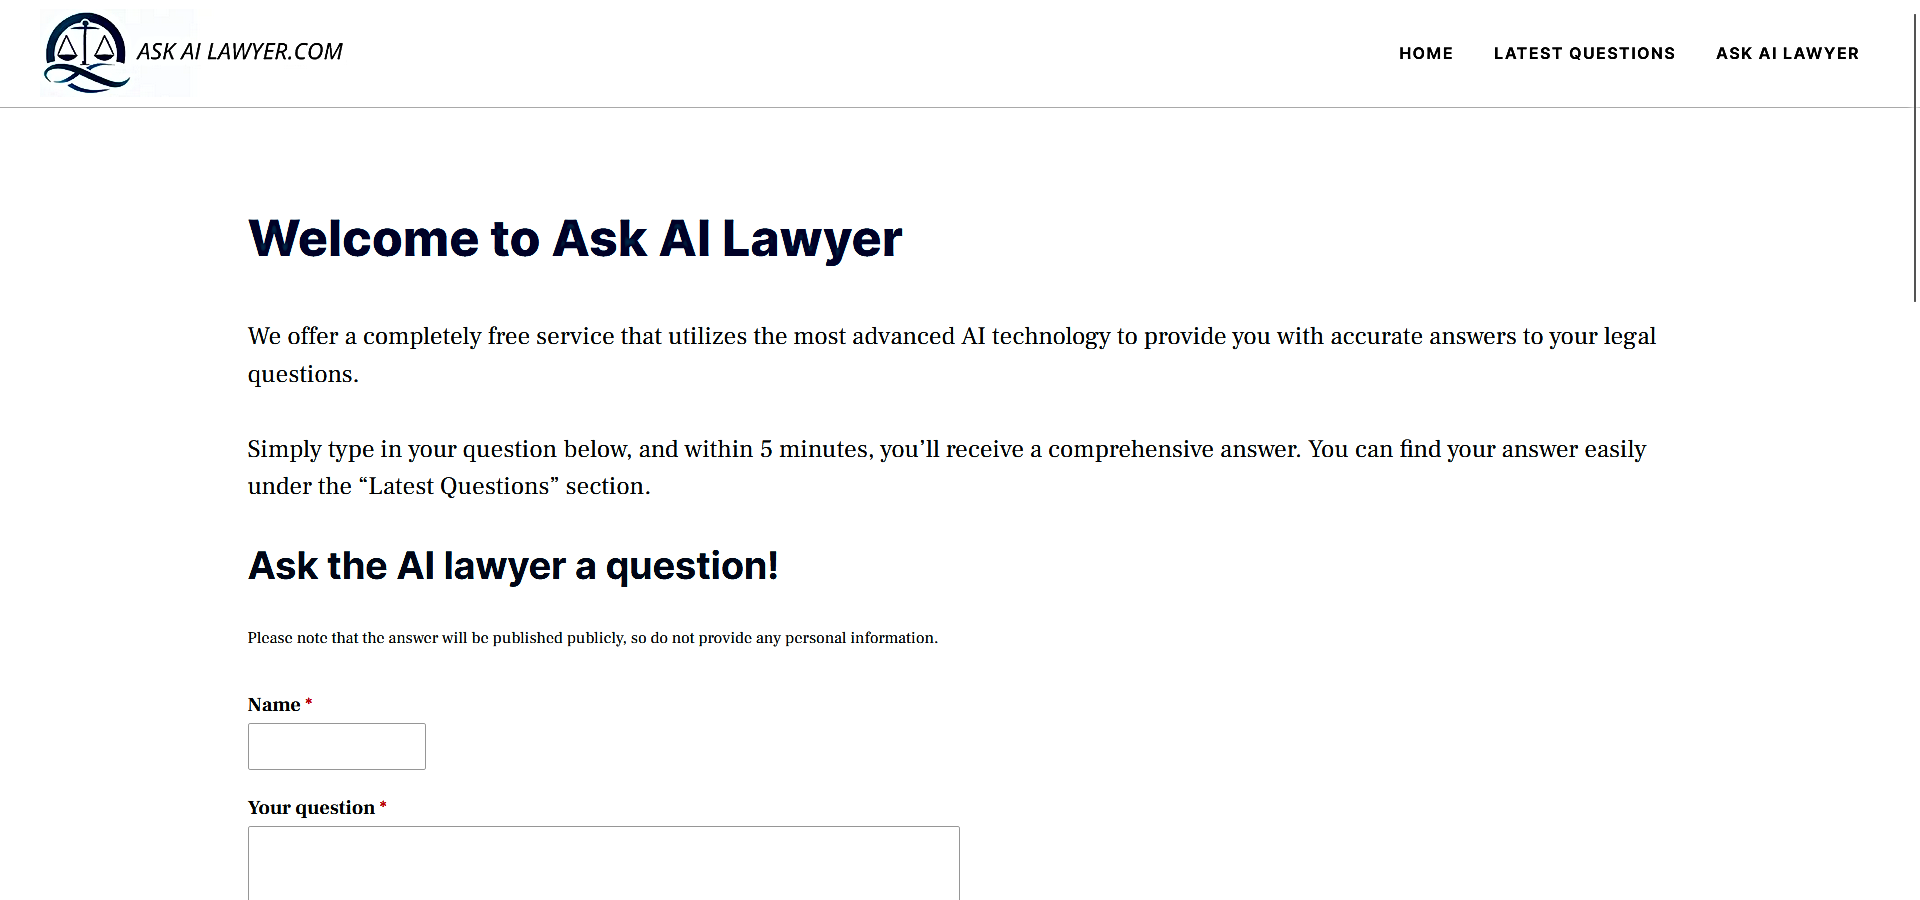 Ask AI Lawyer featured